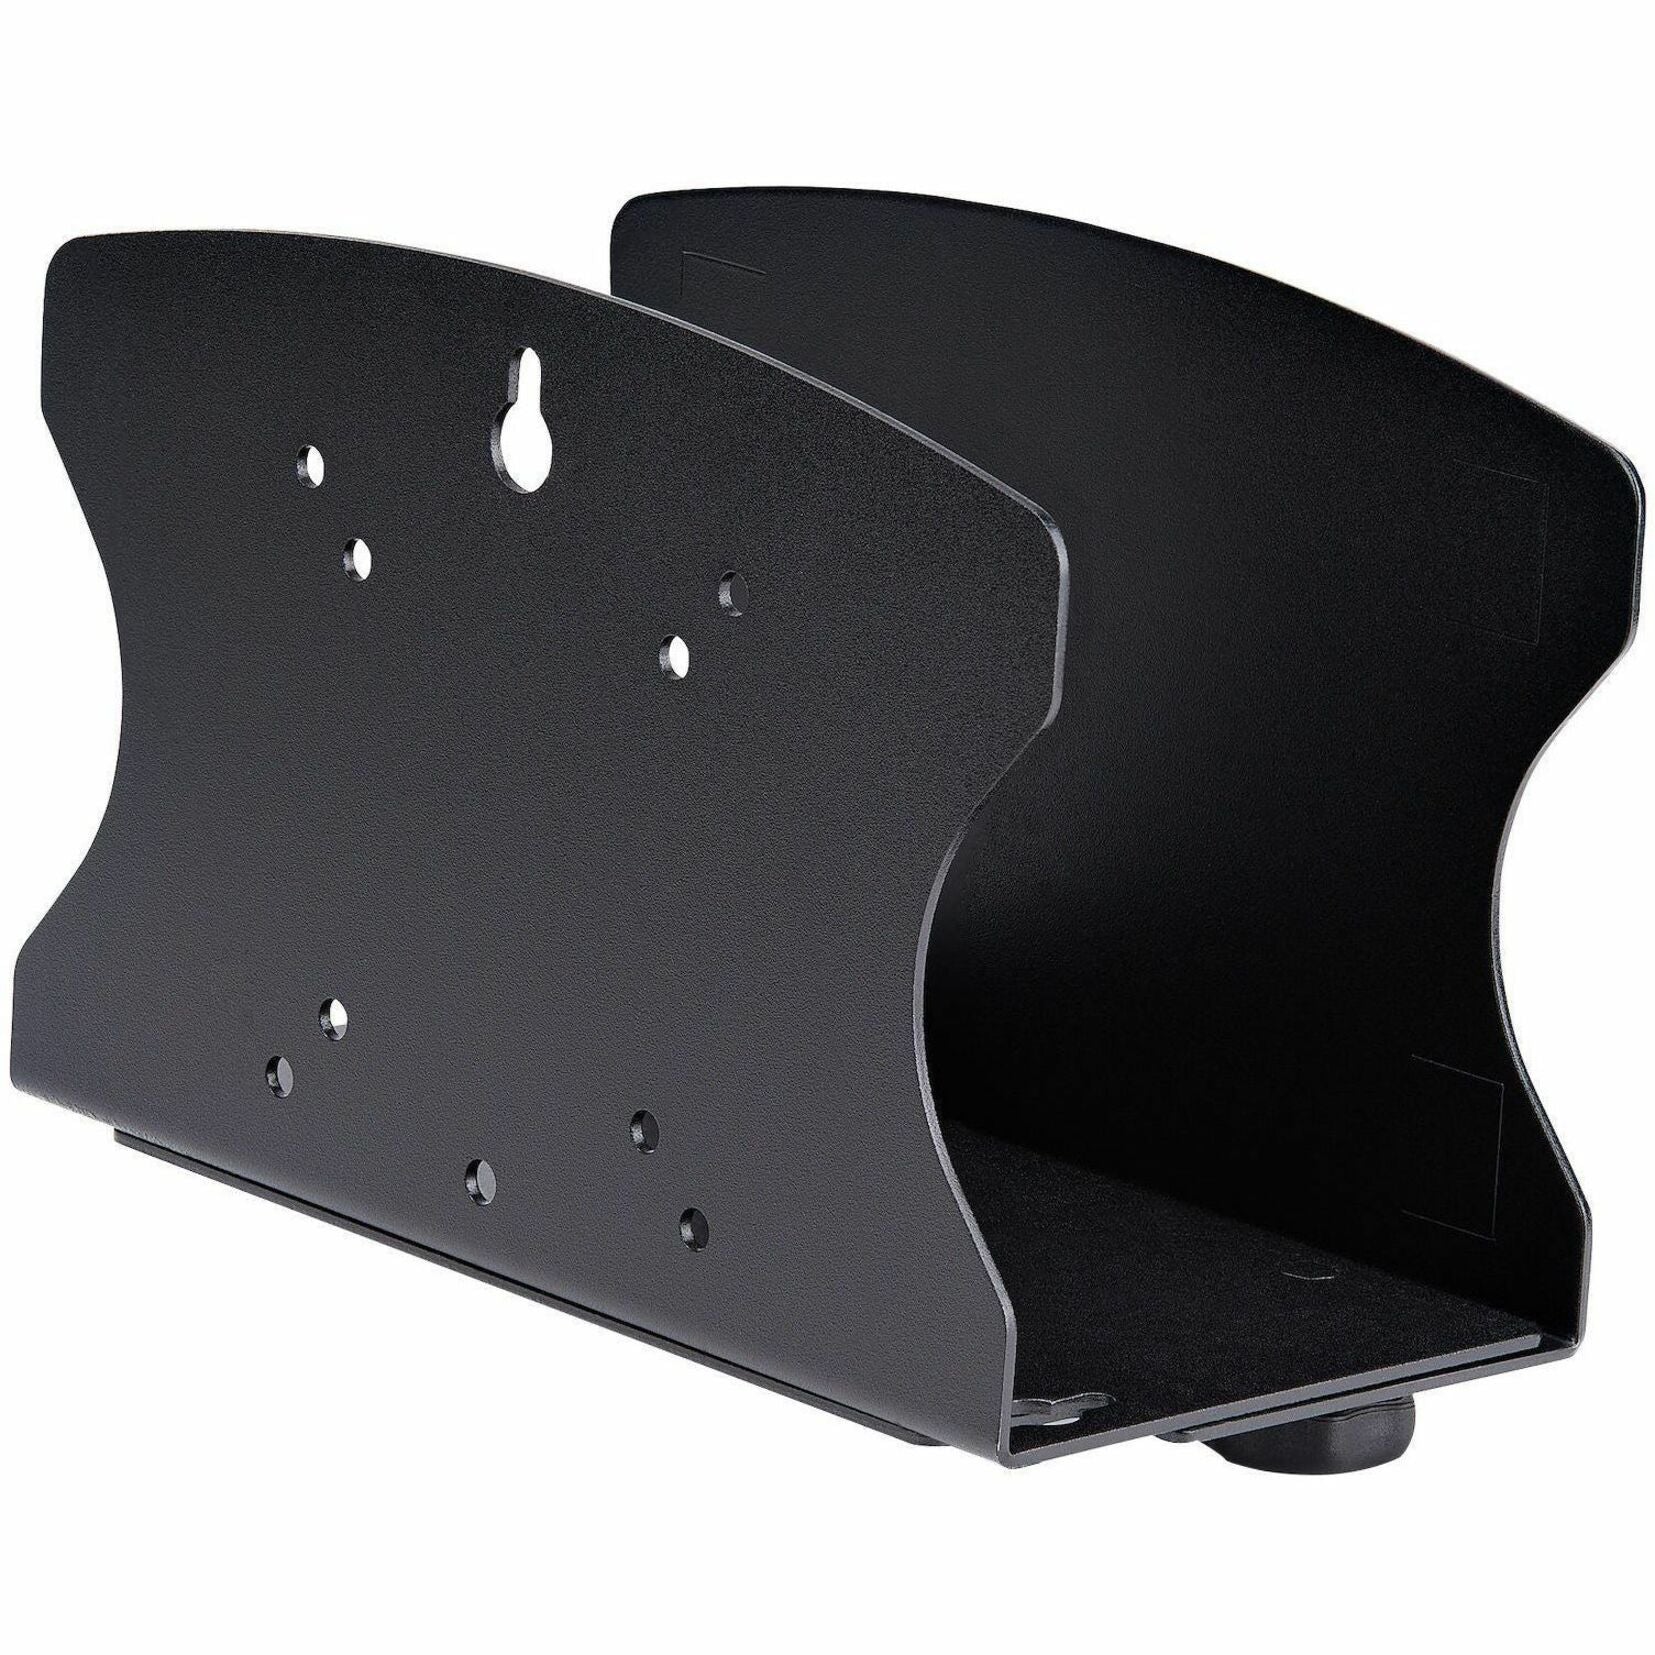 StarTech.com 2NS-CPU-WALL-MOUNT Mounting Bracket, Self-adhesive, Damage Resistant, Durable, Heavy Duty, Space Saving Design, Adjustable Width, Tool-less Adjustment, Scratch Resistant, Robust